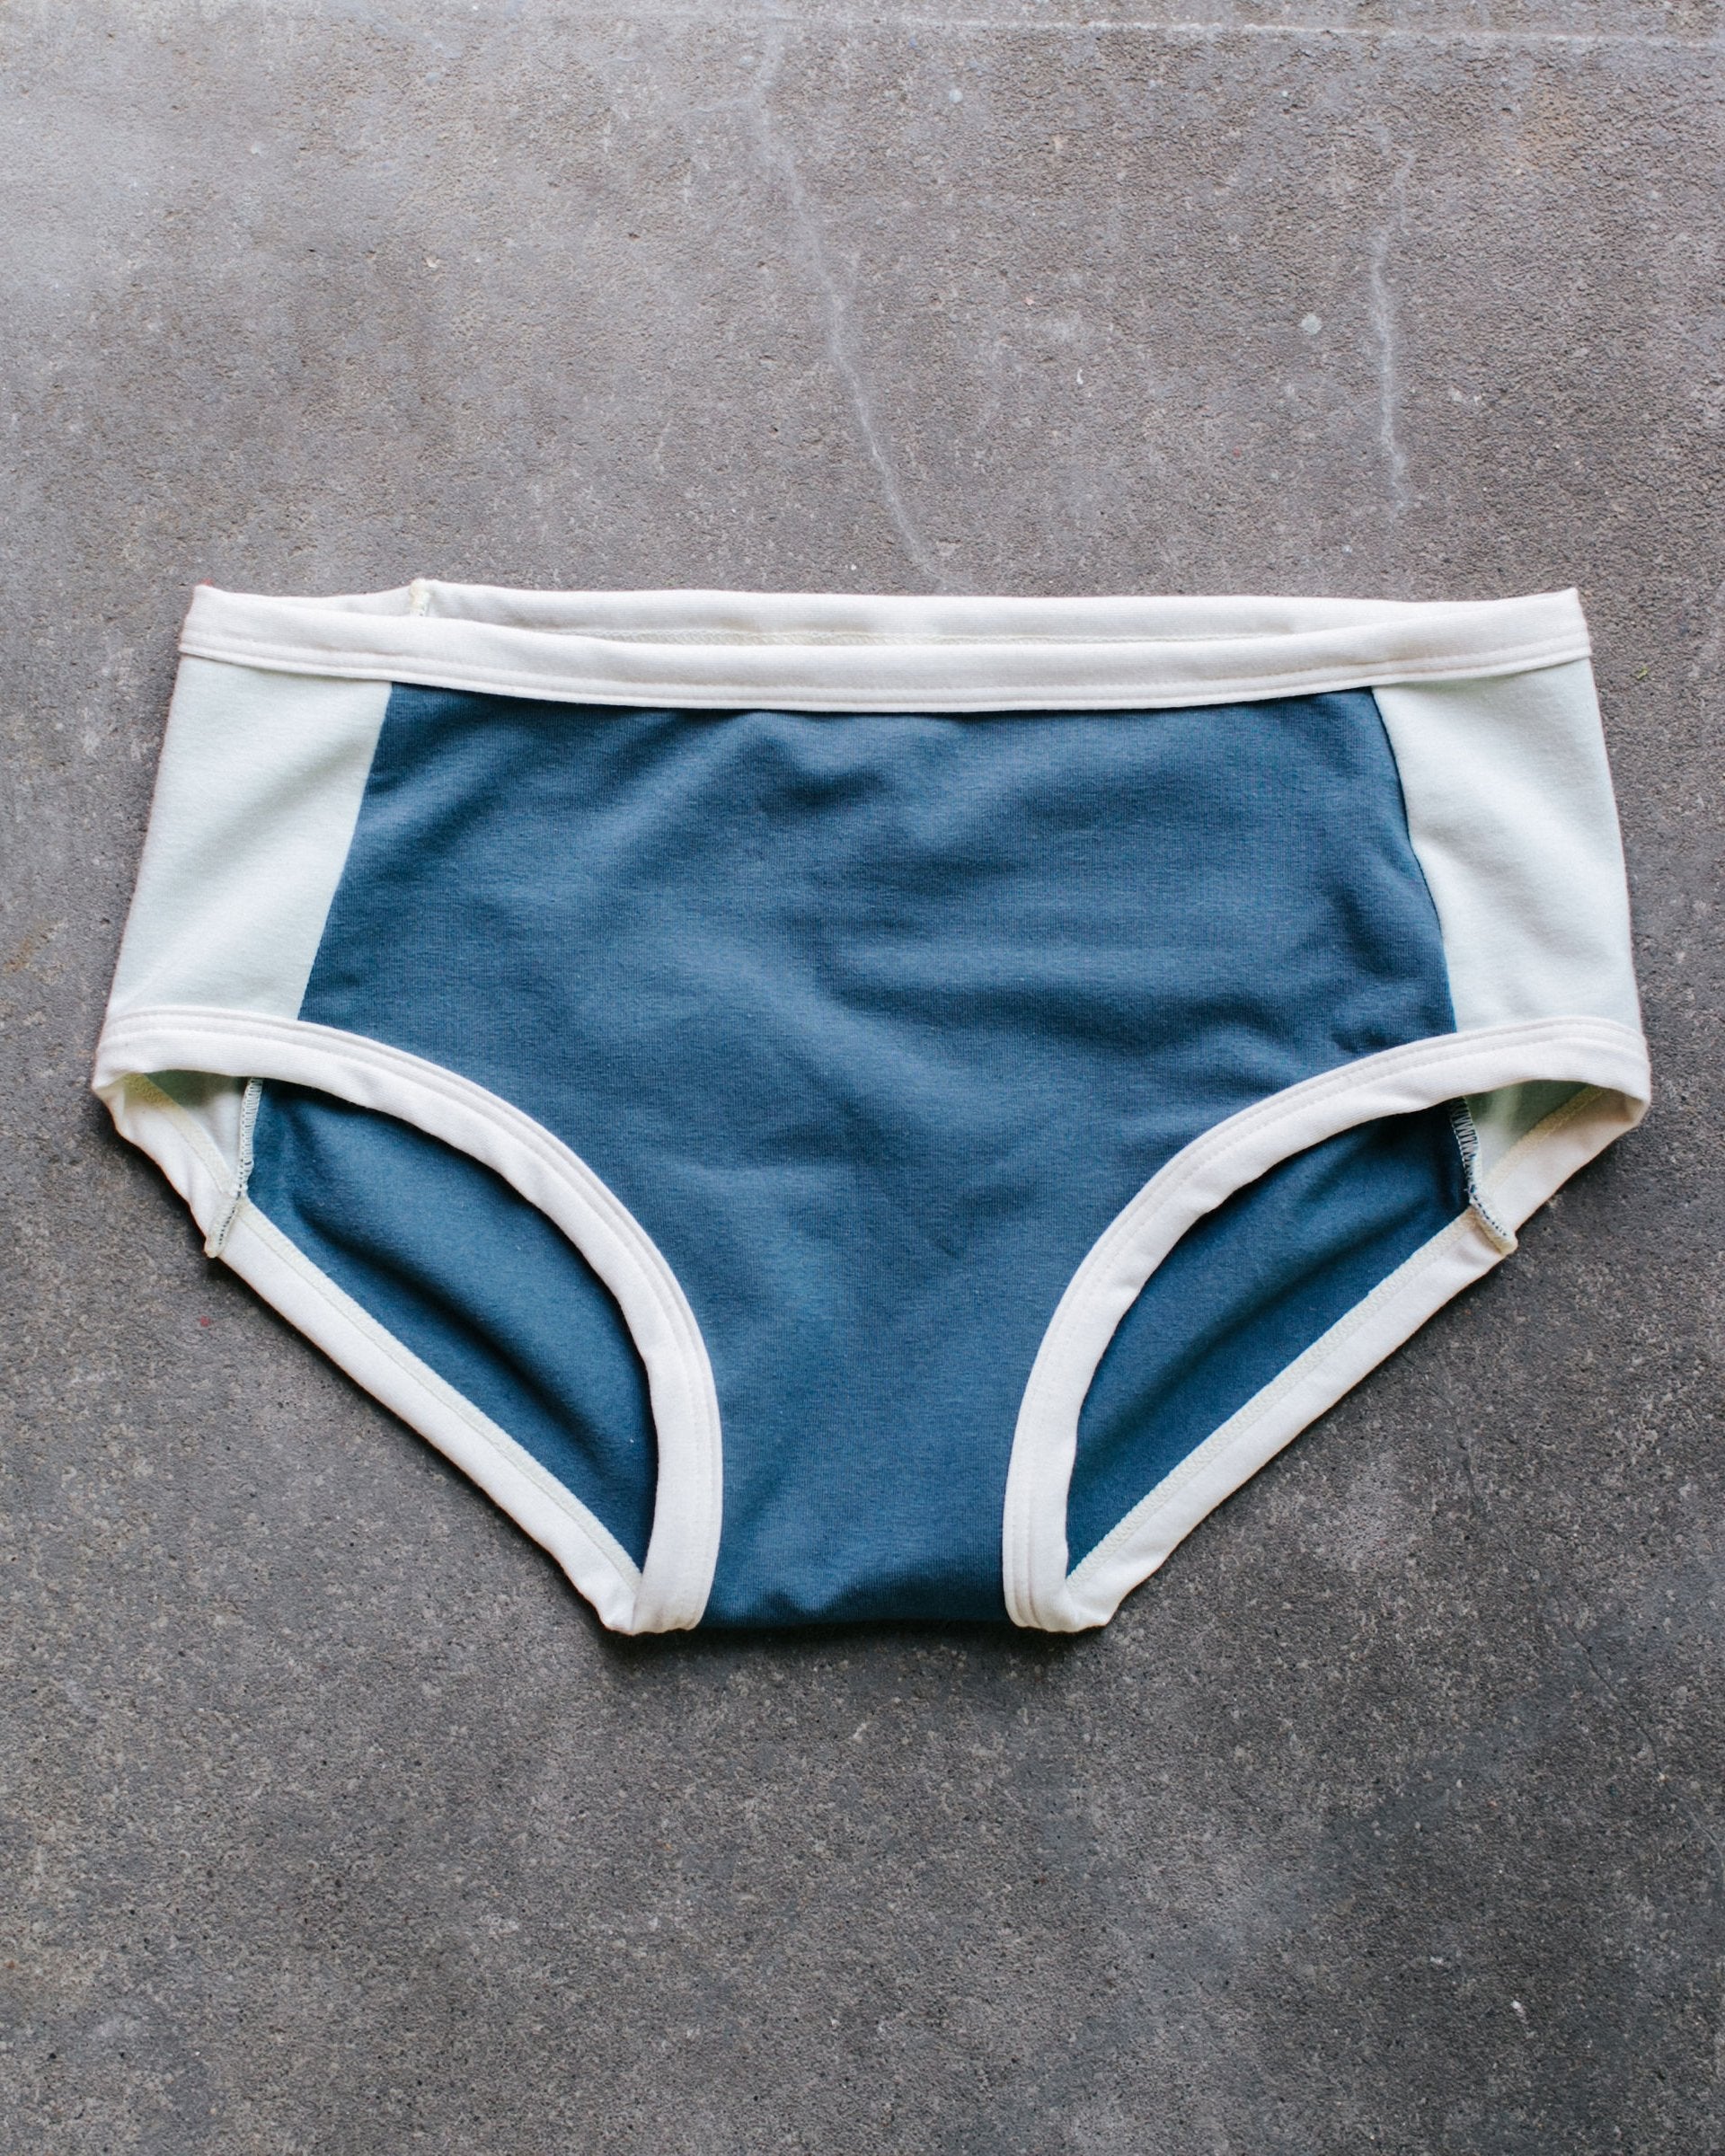 Thunderpants organic cotton Hipster Panel Pant style underwear with stormy blue center and dried sage sides.